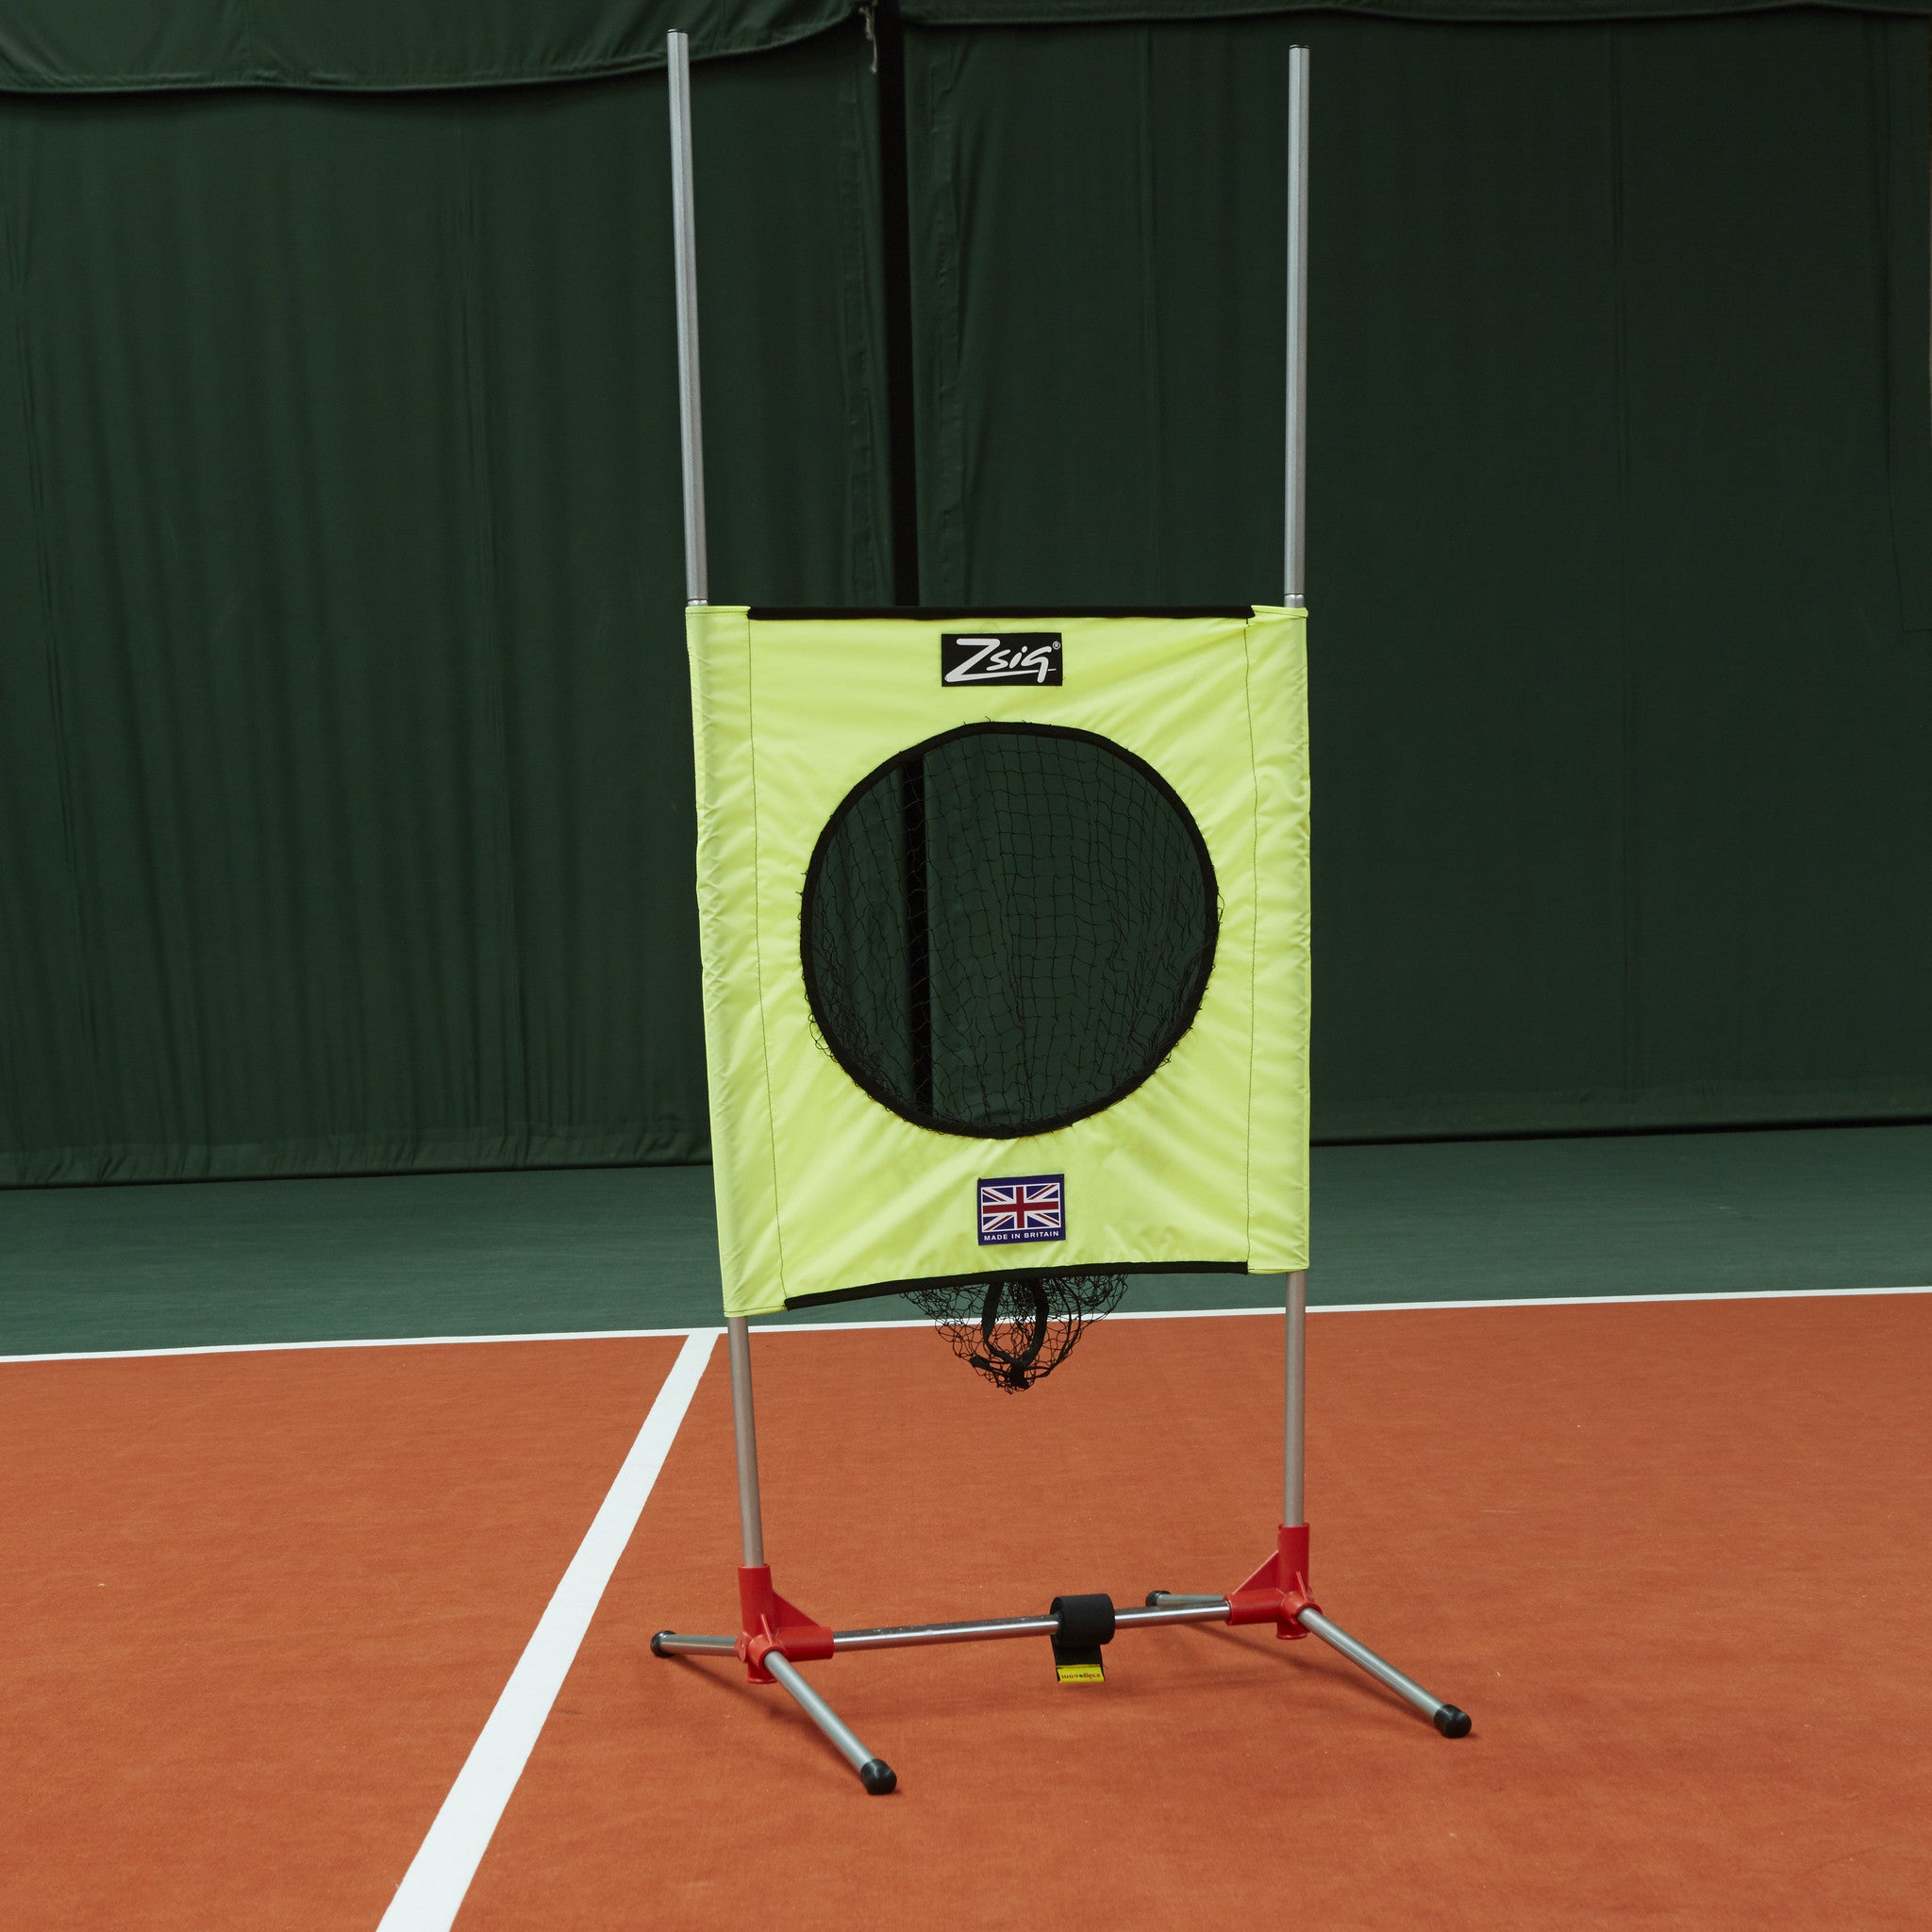 Zsig portable Target Trainer, target lowered, giving two target zones - central circle and between the poles.